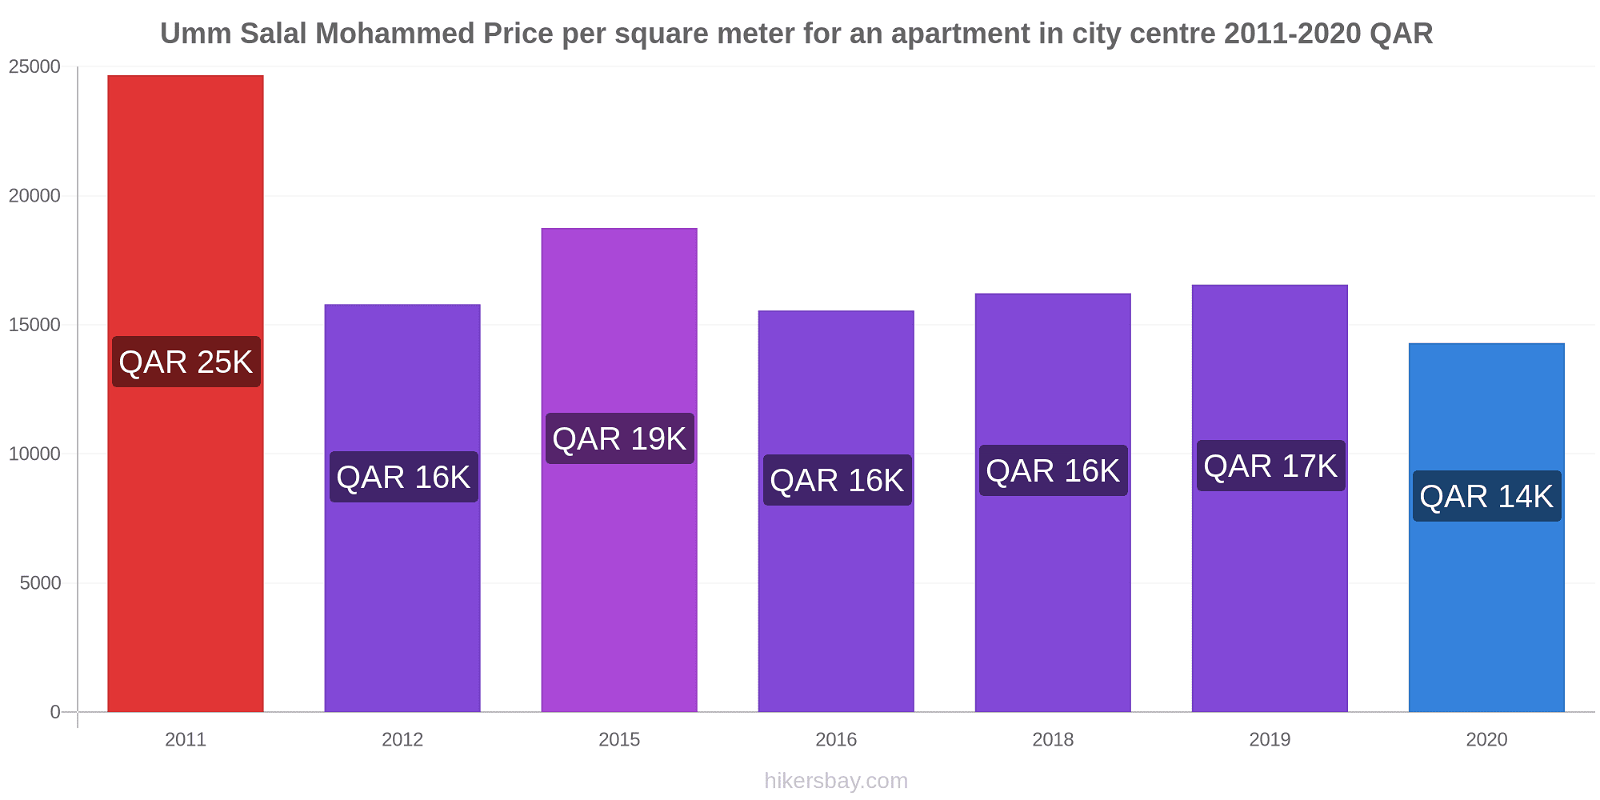 Umm Salal Mohammed price changes Price per square meter for an apartment in city centre hikersbay.com